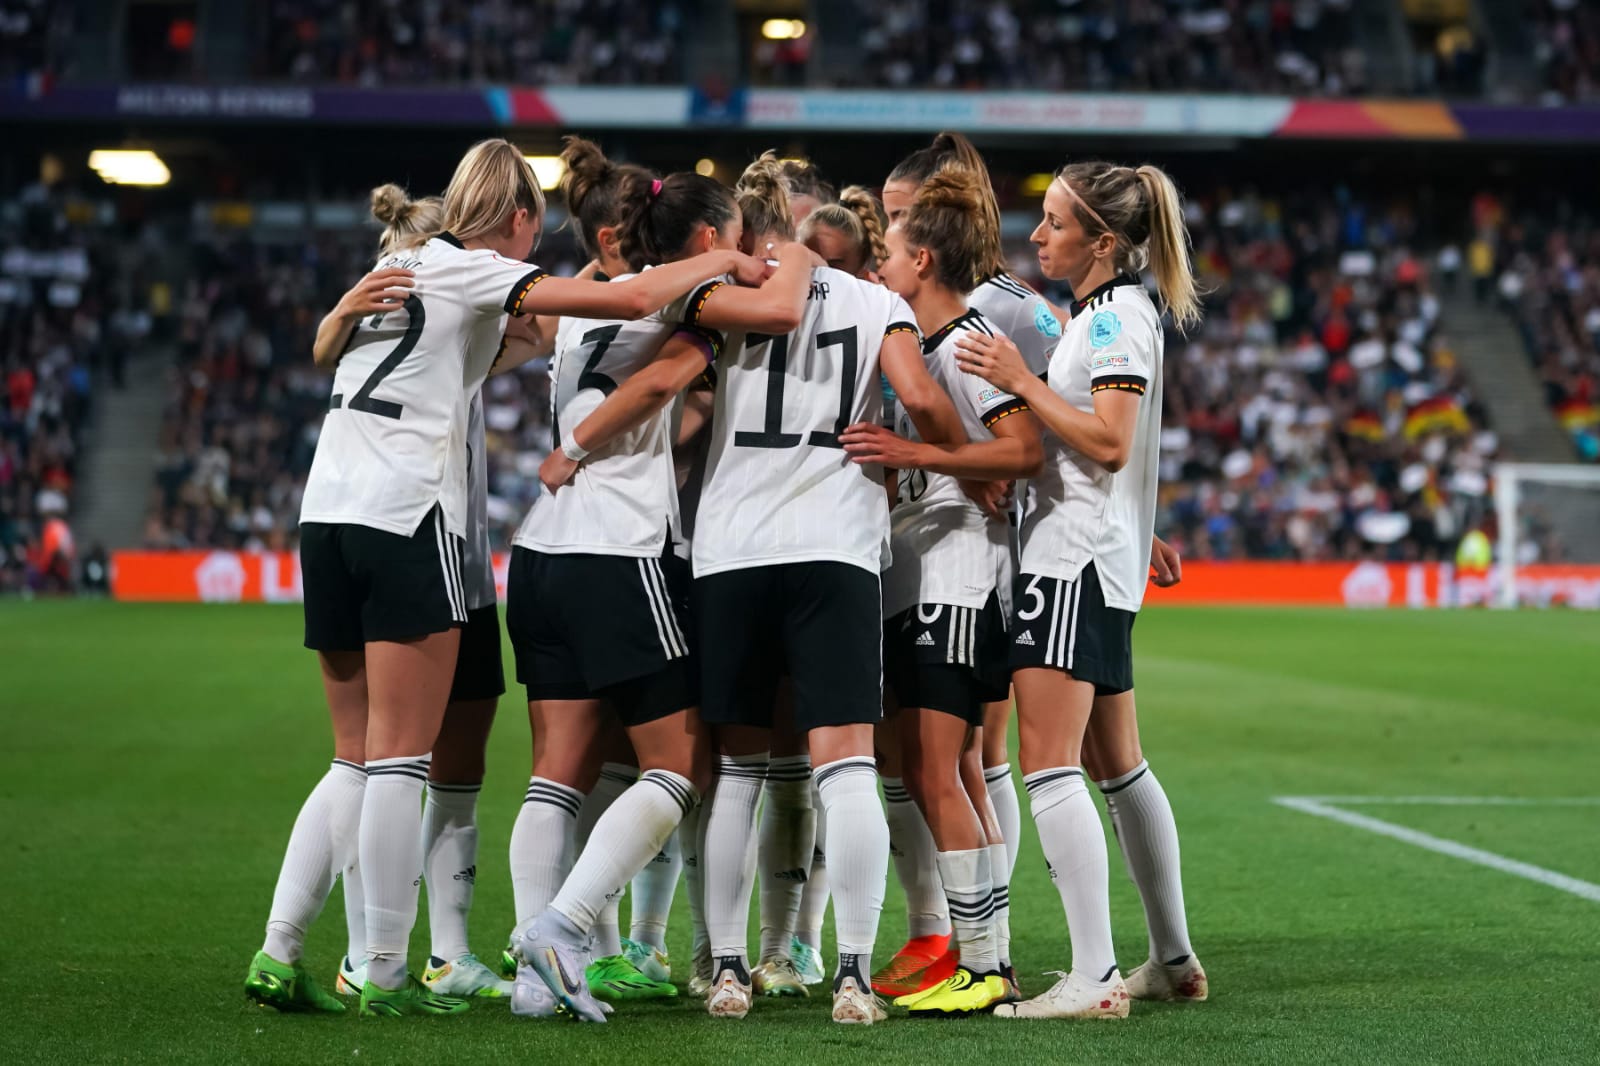 UEFA Women's EURO Final 2022 LIVE Streaming: England vs Germany - When, where and how to watch the LIVE Streaming and Live Broadcast of Women’s EURO finals 2022 in INDIA: Check out details